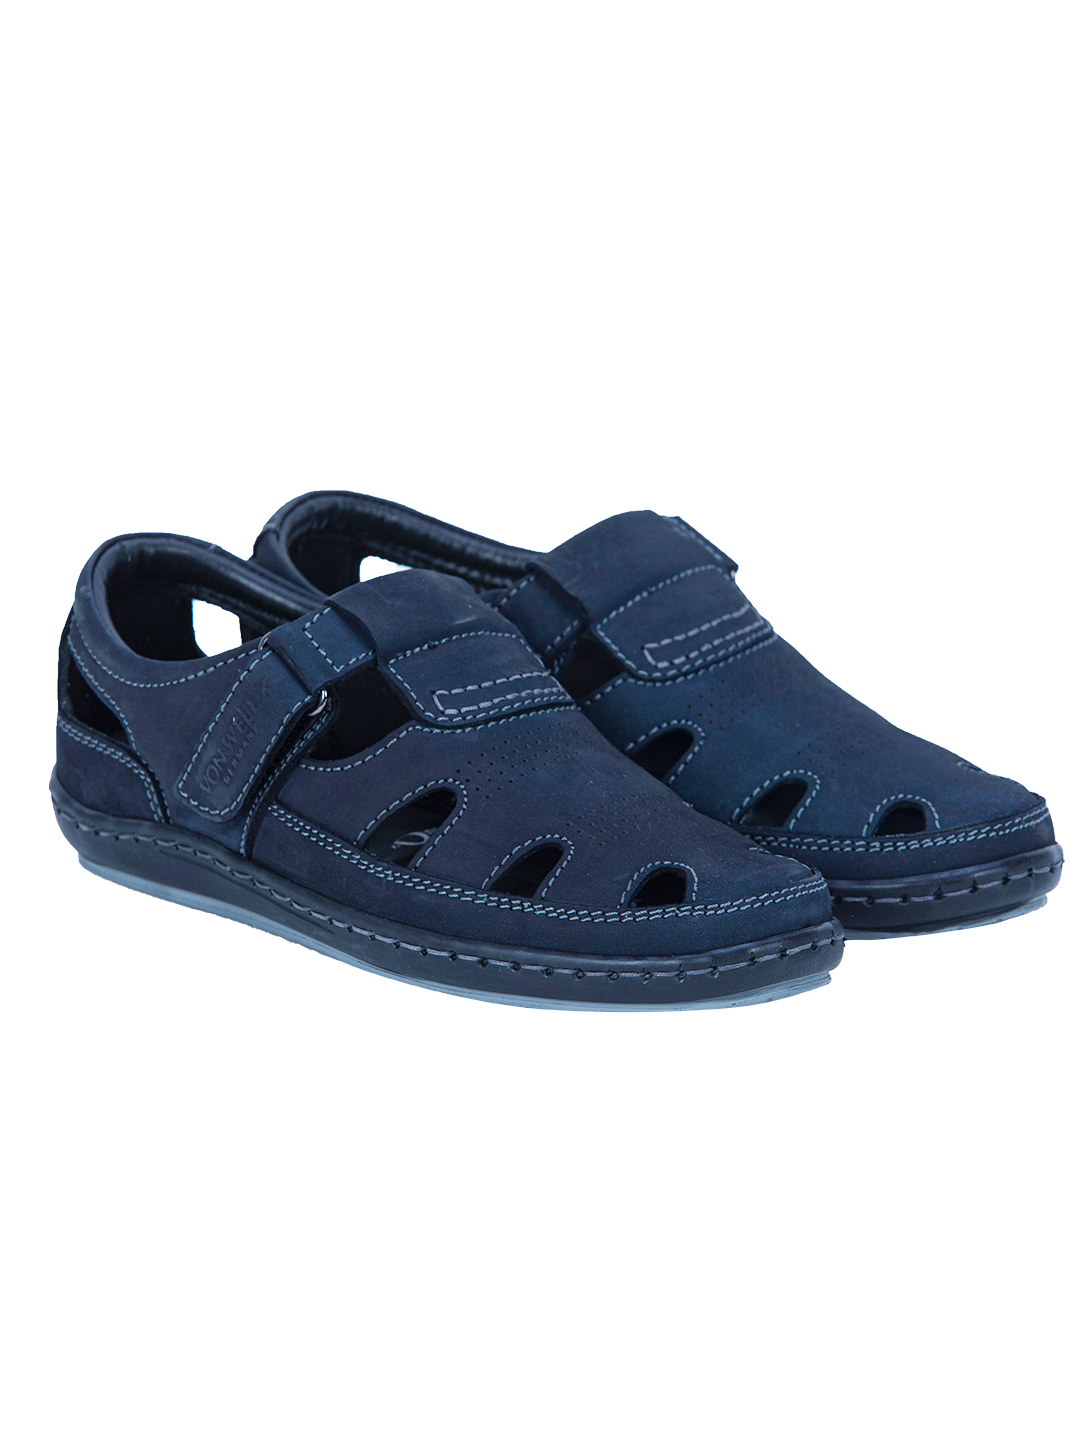 Buy Maddy Comfort Sport & Casual Sandals For Men's Online at Lowest Price  Ever in India | Check Reviews & Ratings - Shop The World